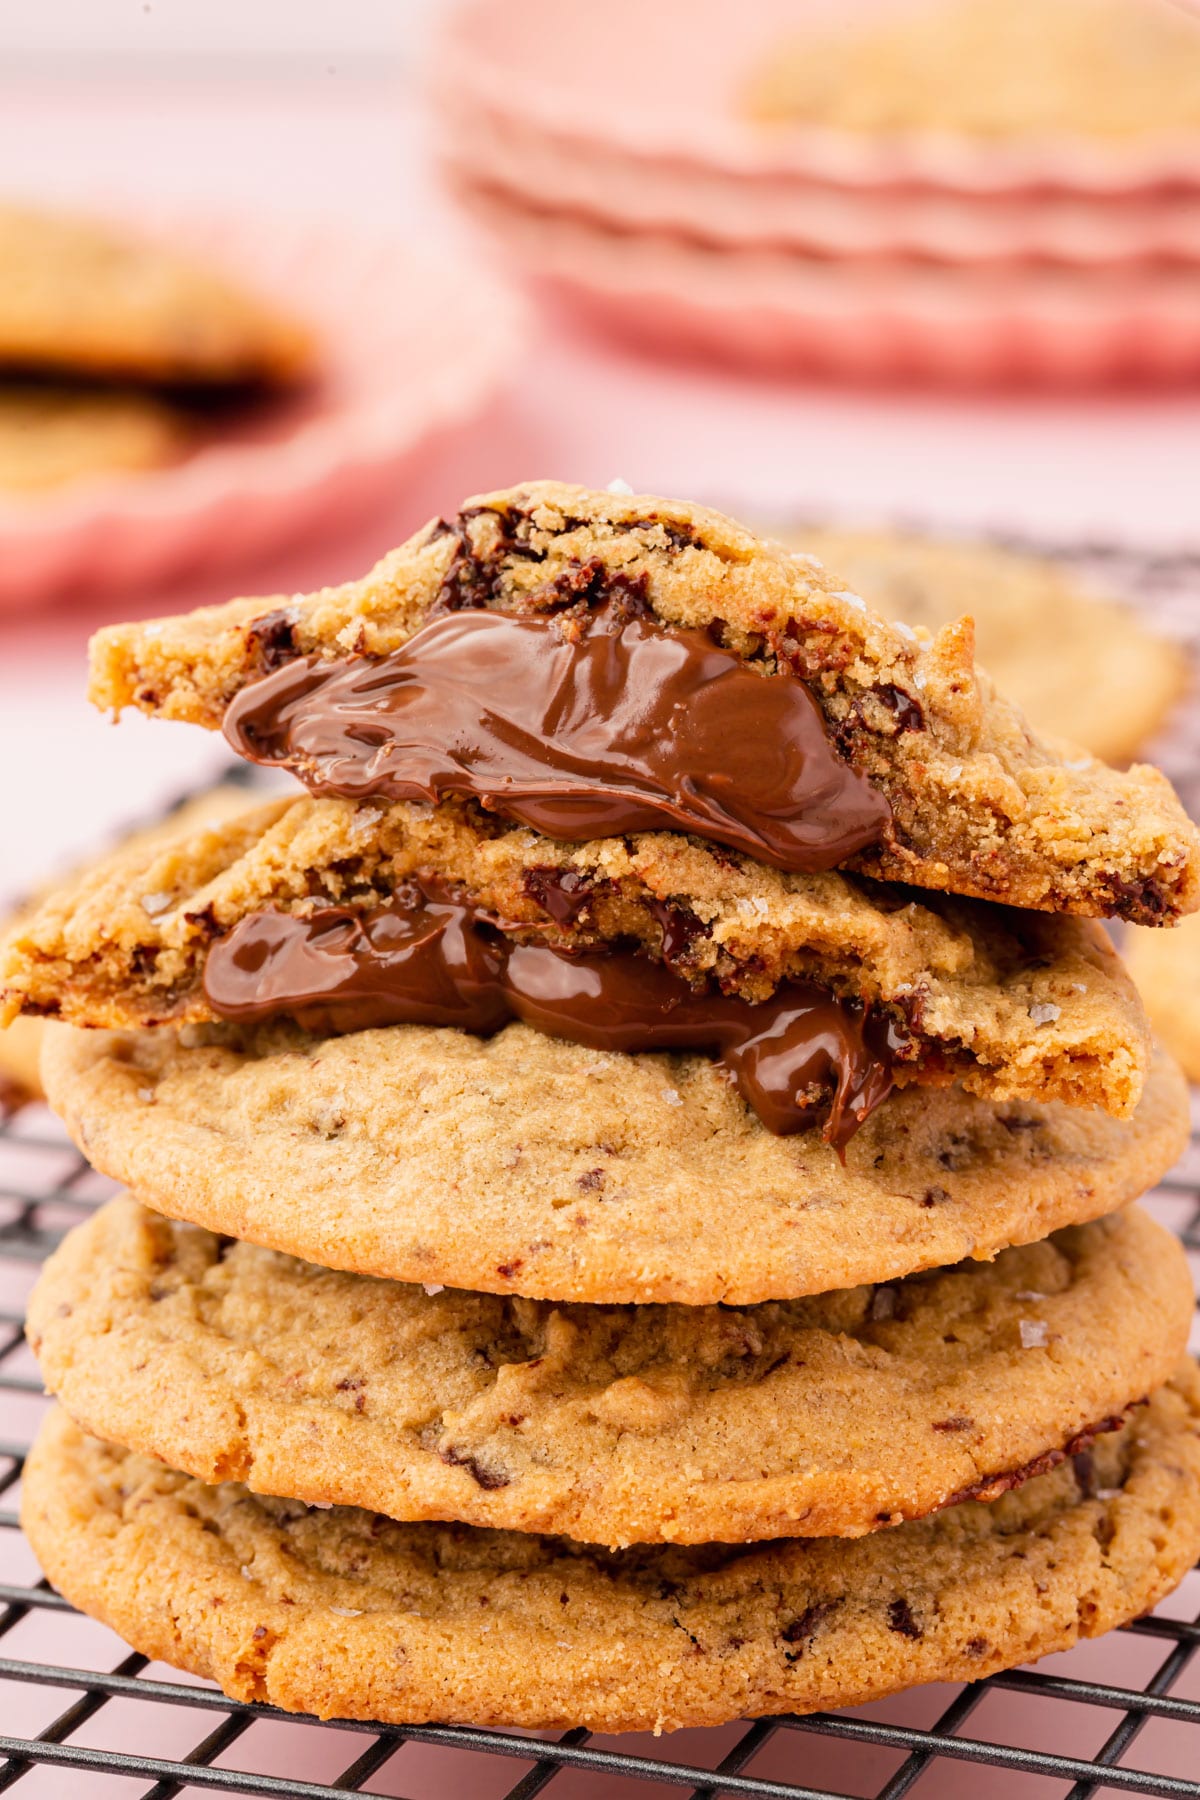 A pile of gluten-free Nutella stuffed peanut butter cookies with the top cookie split in half and stacked atop one another to show the gooey Nutella filling.